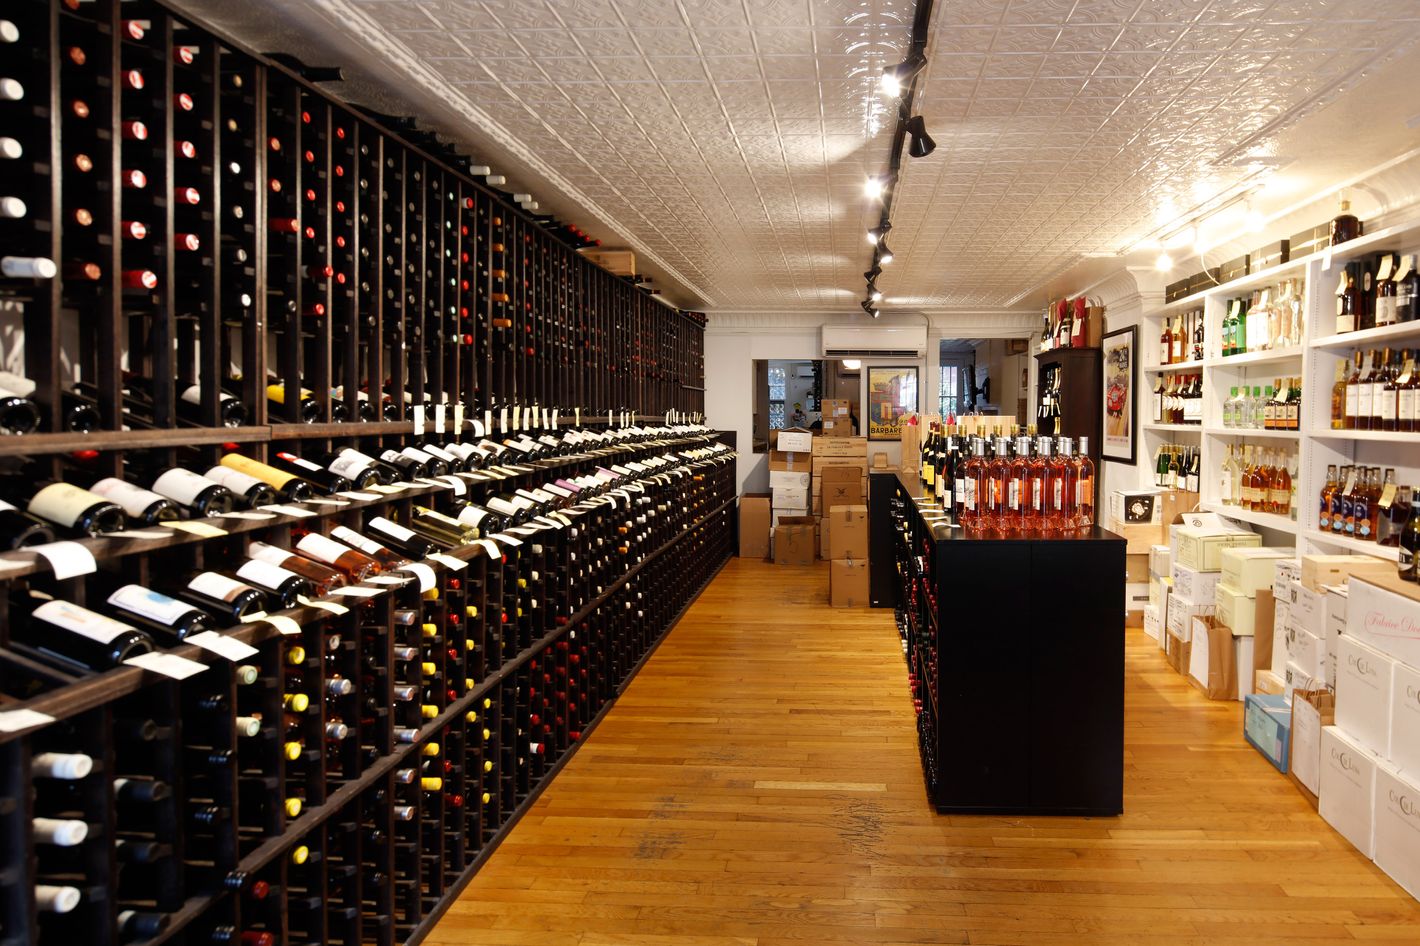 Pete's supermarket and wine shop